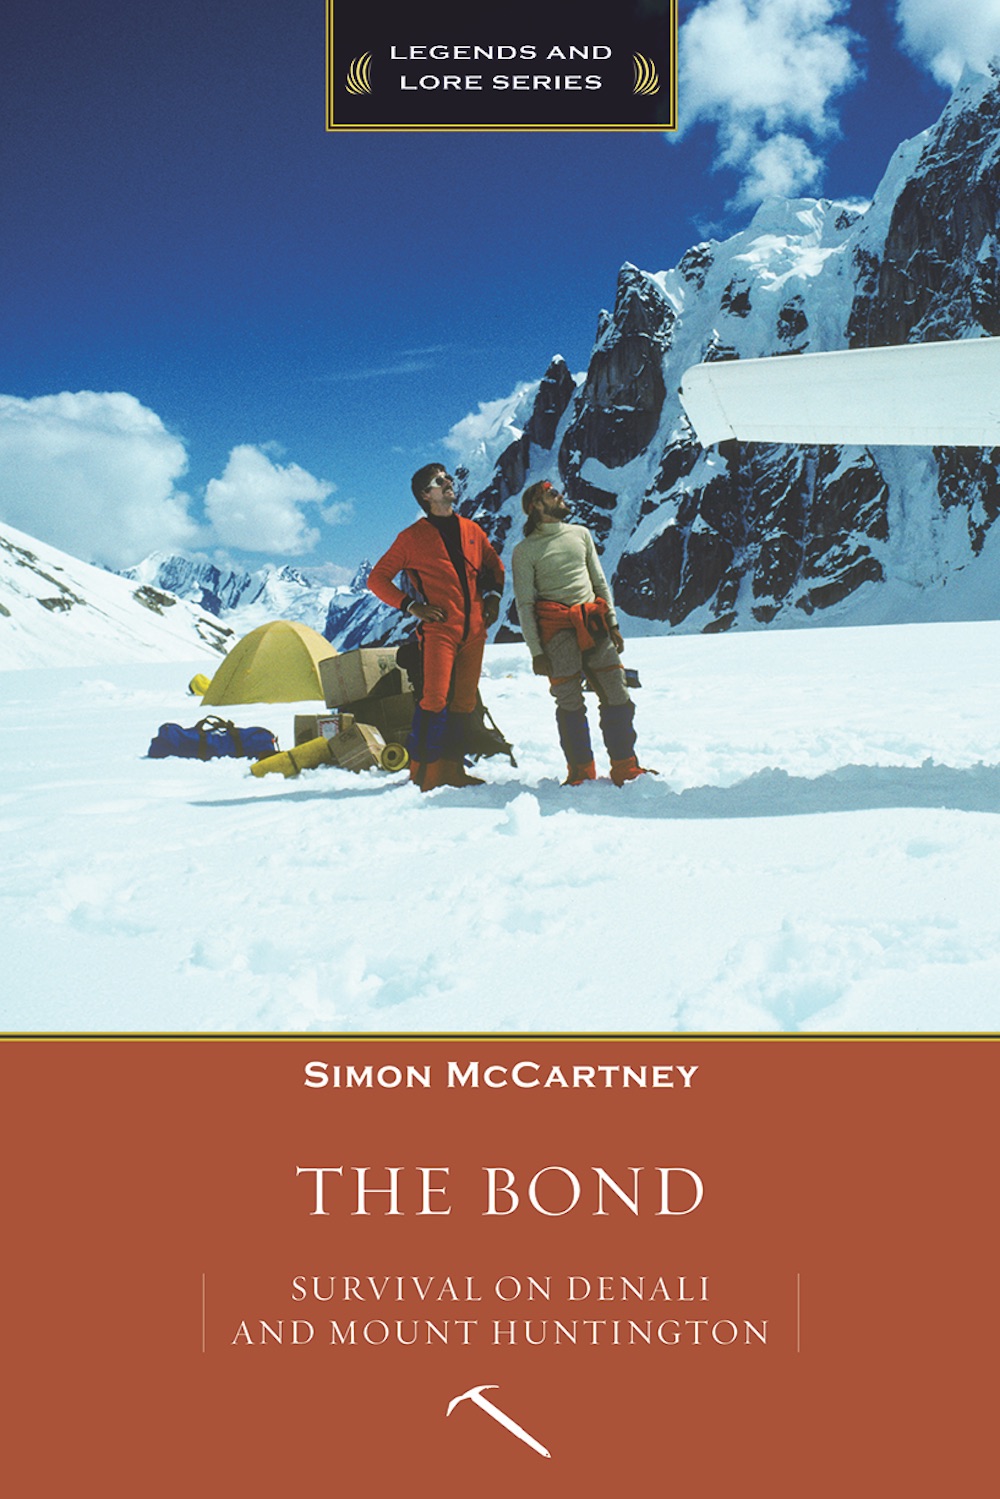 The Bond: Survival of Denali and Mount Huntington, by Simon McCartney. [Photo] Courtesy of Mountaineers Books